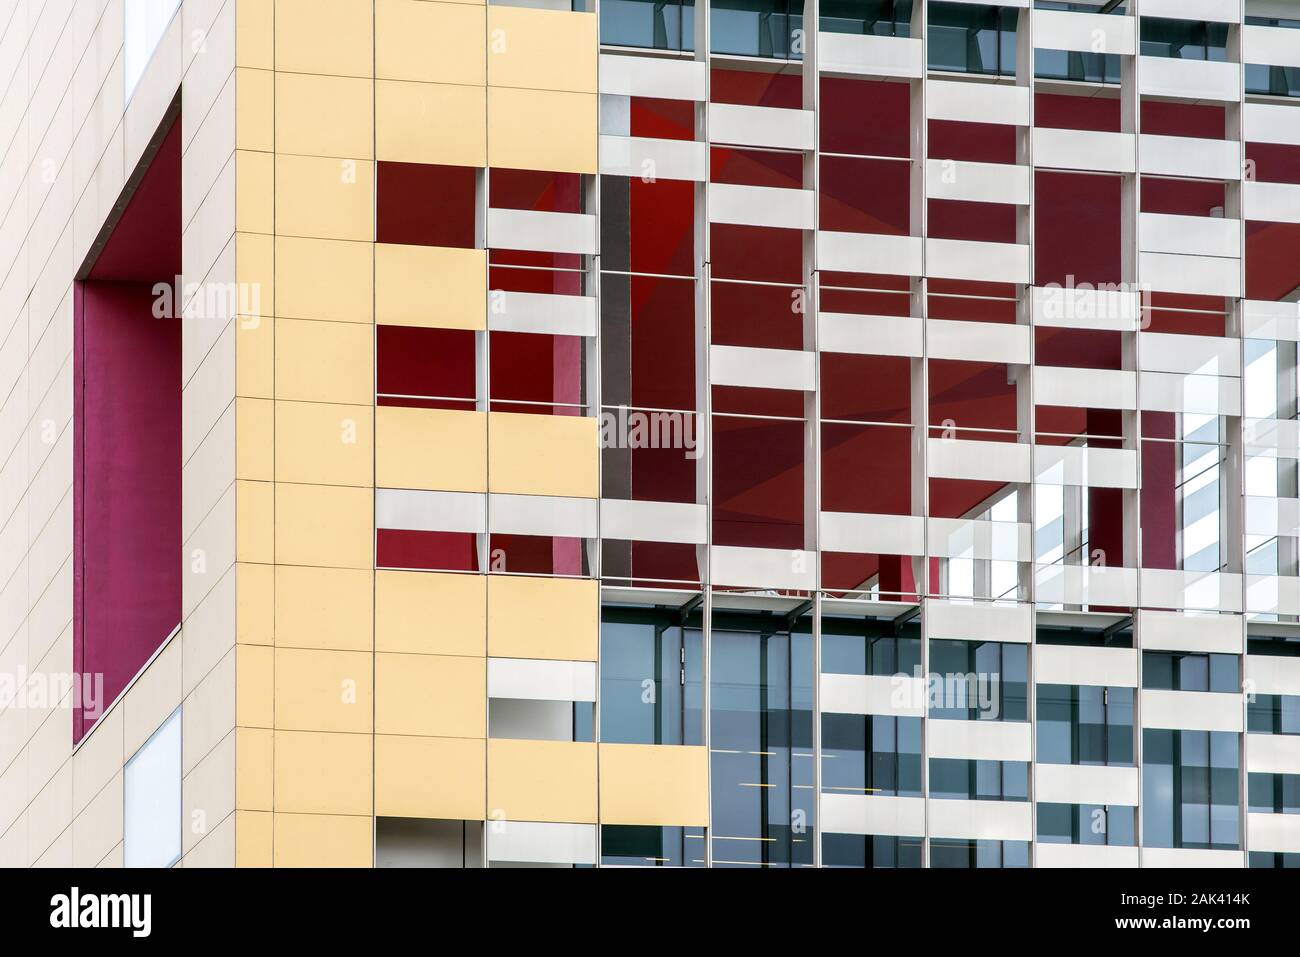 Colorful facade of a modern commercial building in a full frame architectural design detail background Stock Photo